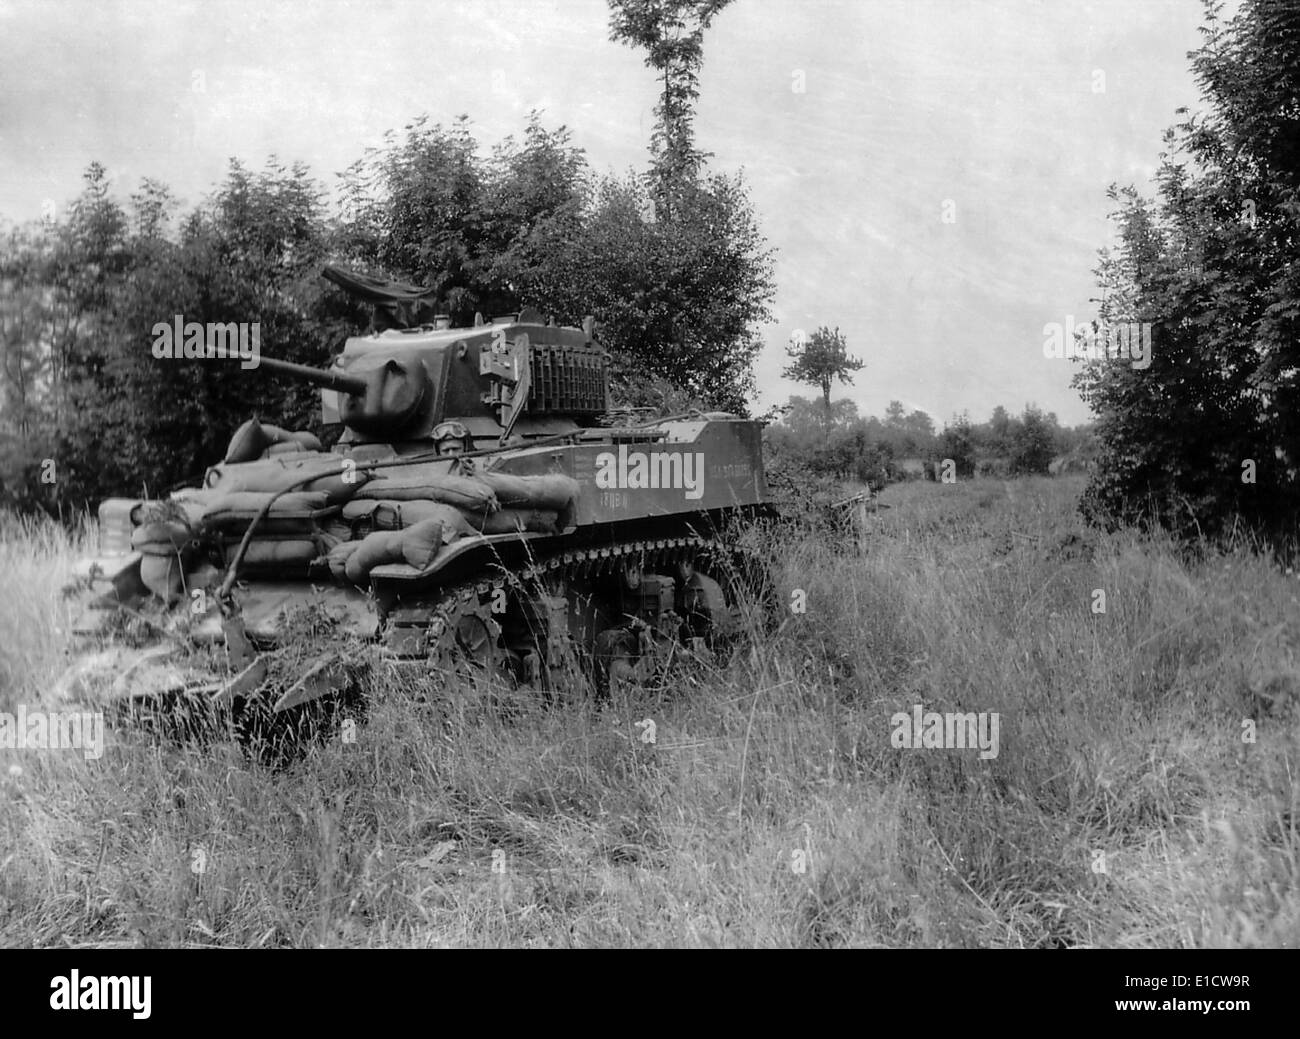 U.S. light tank equipped with the 'Culin Hedgecutter' for breaching the Norman hedgerows. The sharp blades were made from Stock Photo